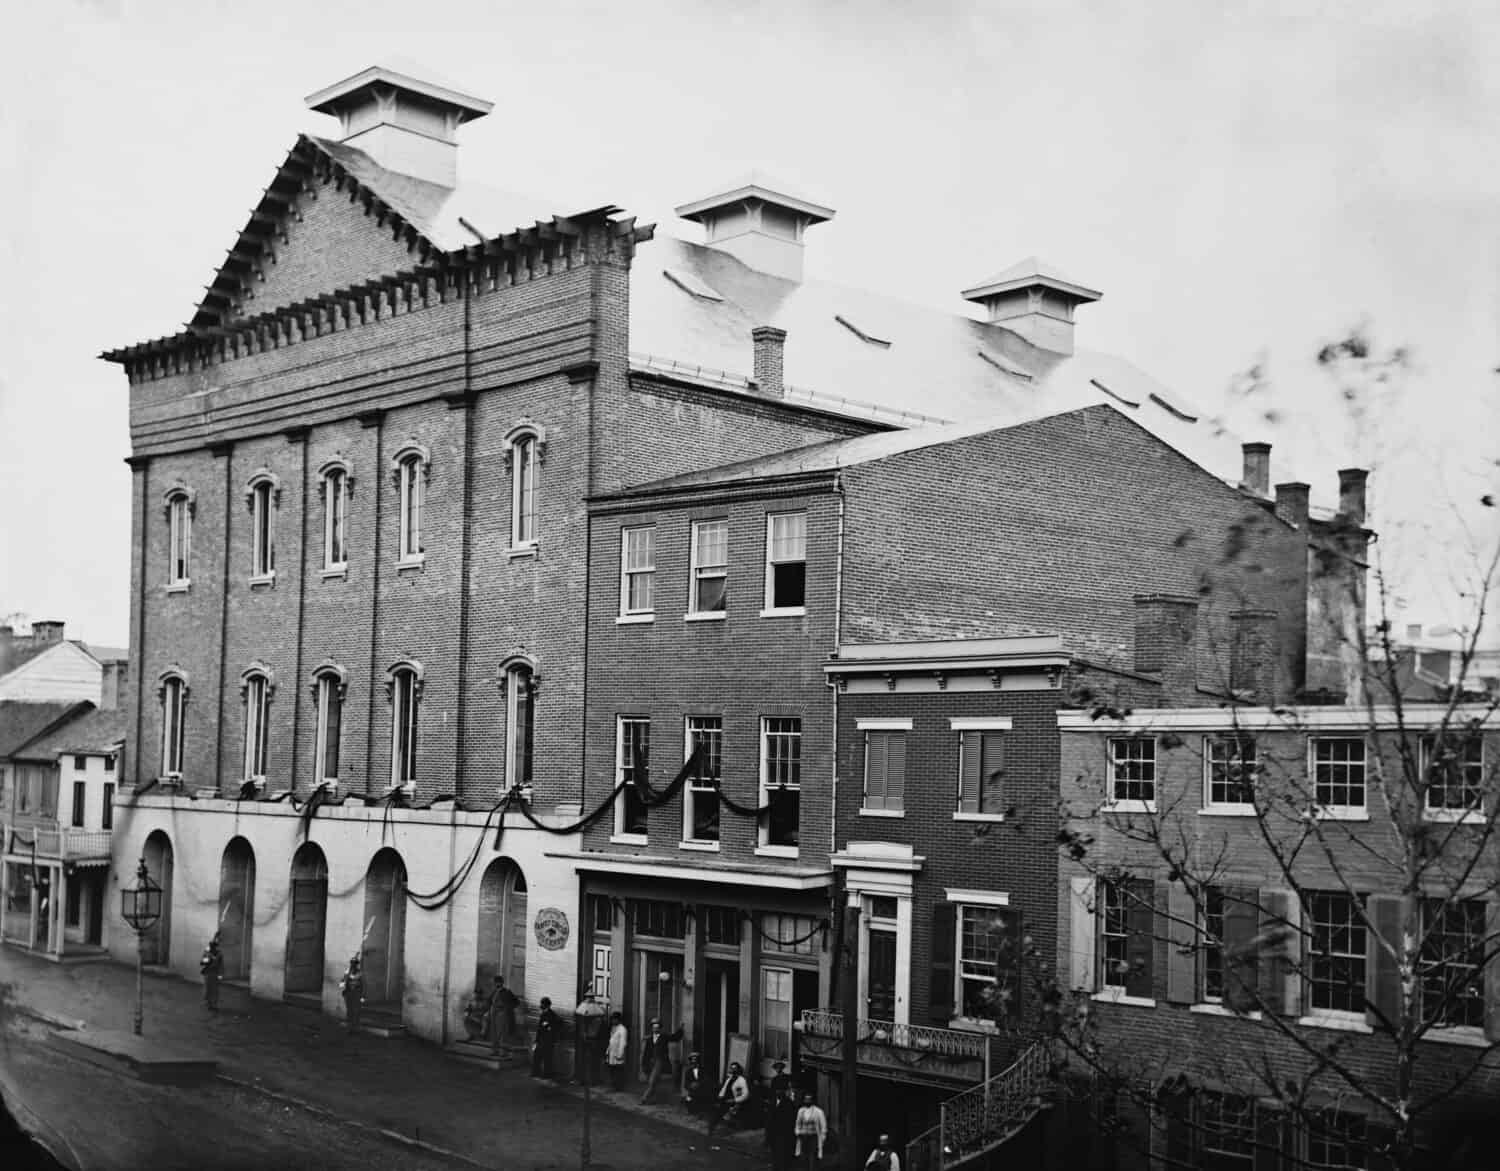 Abraham Lincoln's assassination took place in Ford's Theatre on April 14, 1865. Photo shows the post-assassination scene with guards posted at entrance and crepe draped from window.